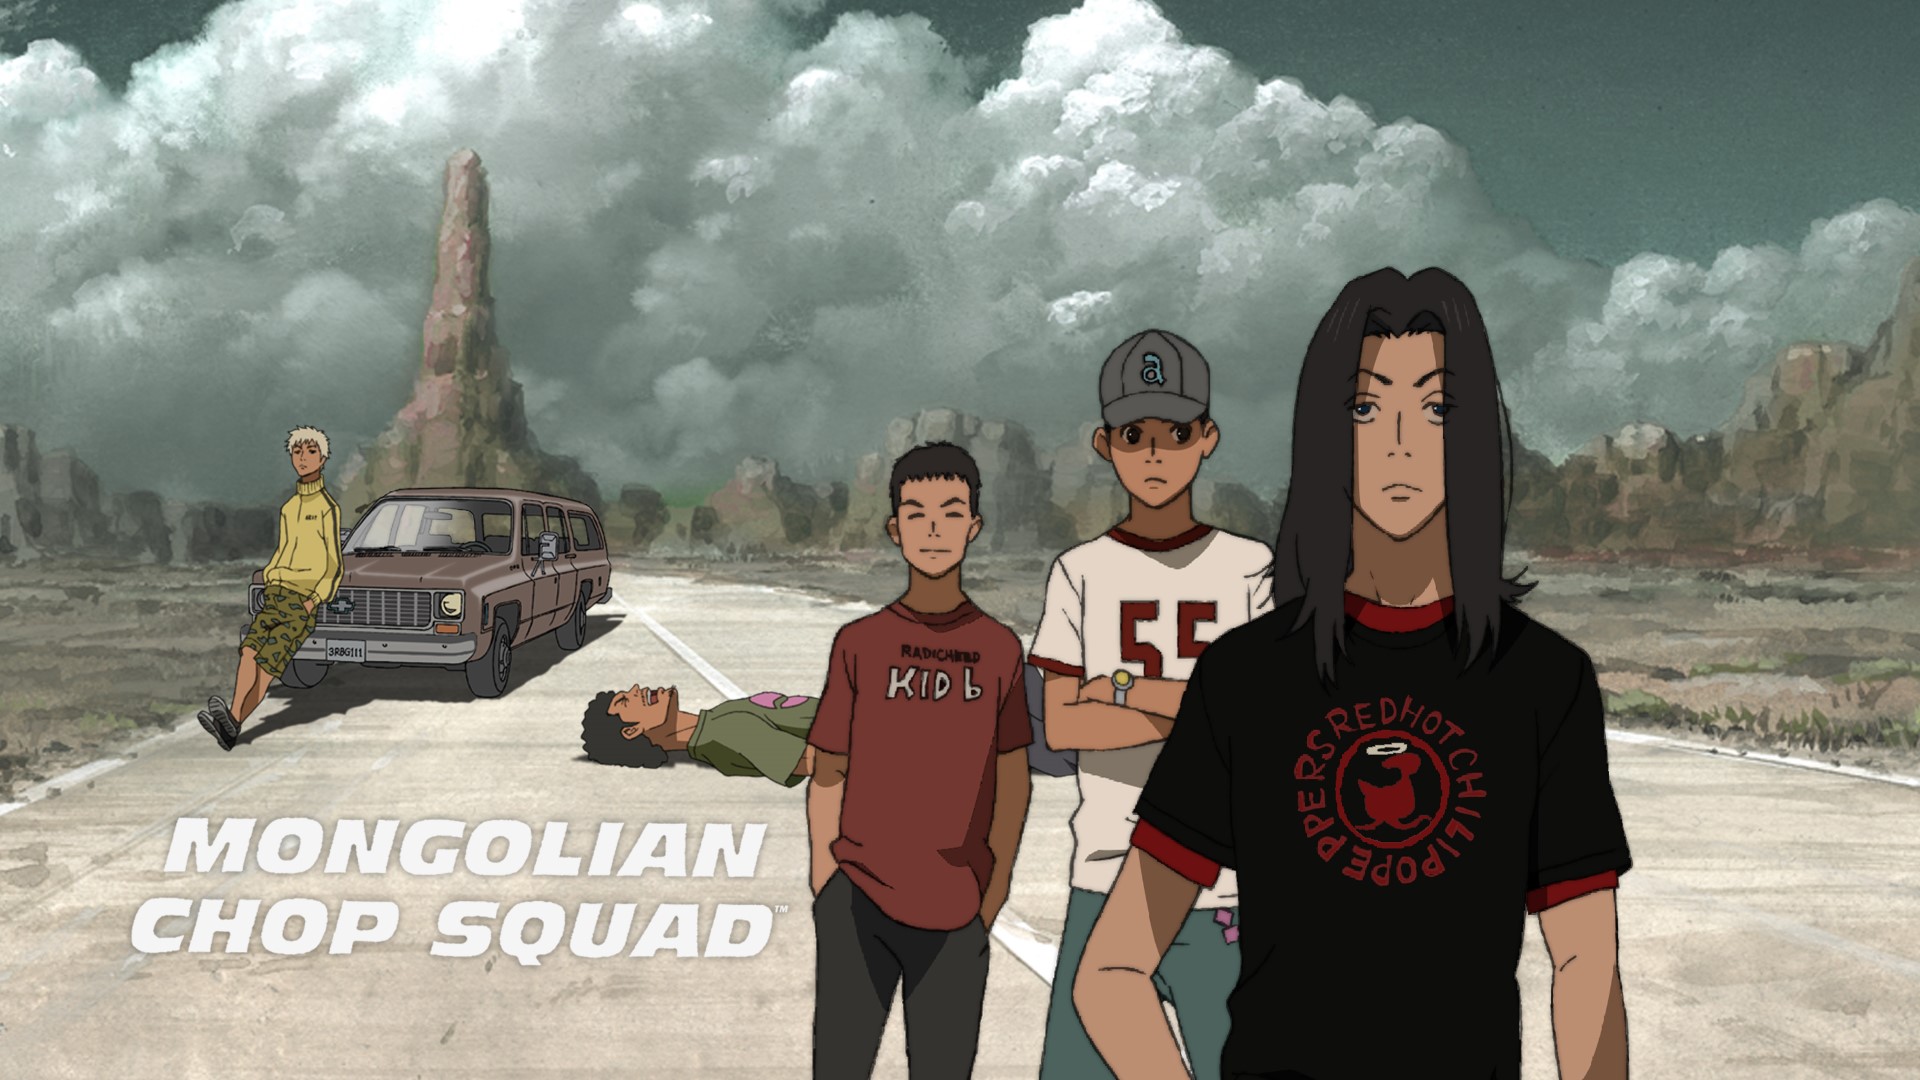 Fun fact: Tom Morello is mentioned and even drawn in the anime Beck  Mongolian chop squad : r/RATM